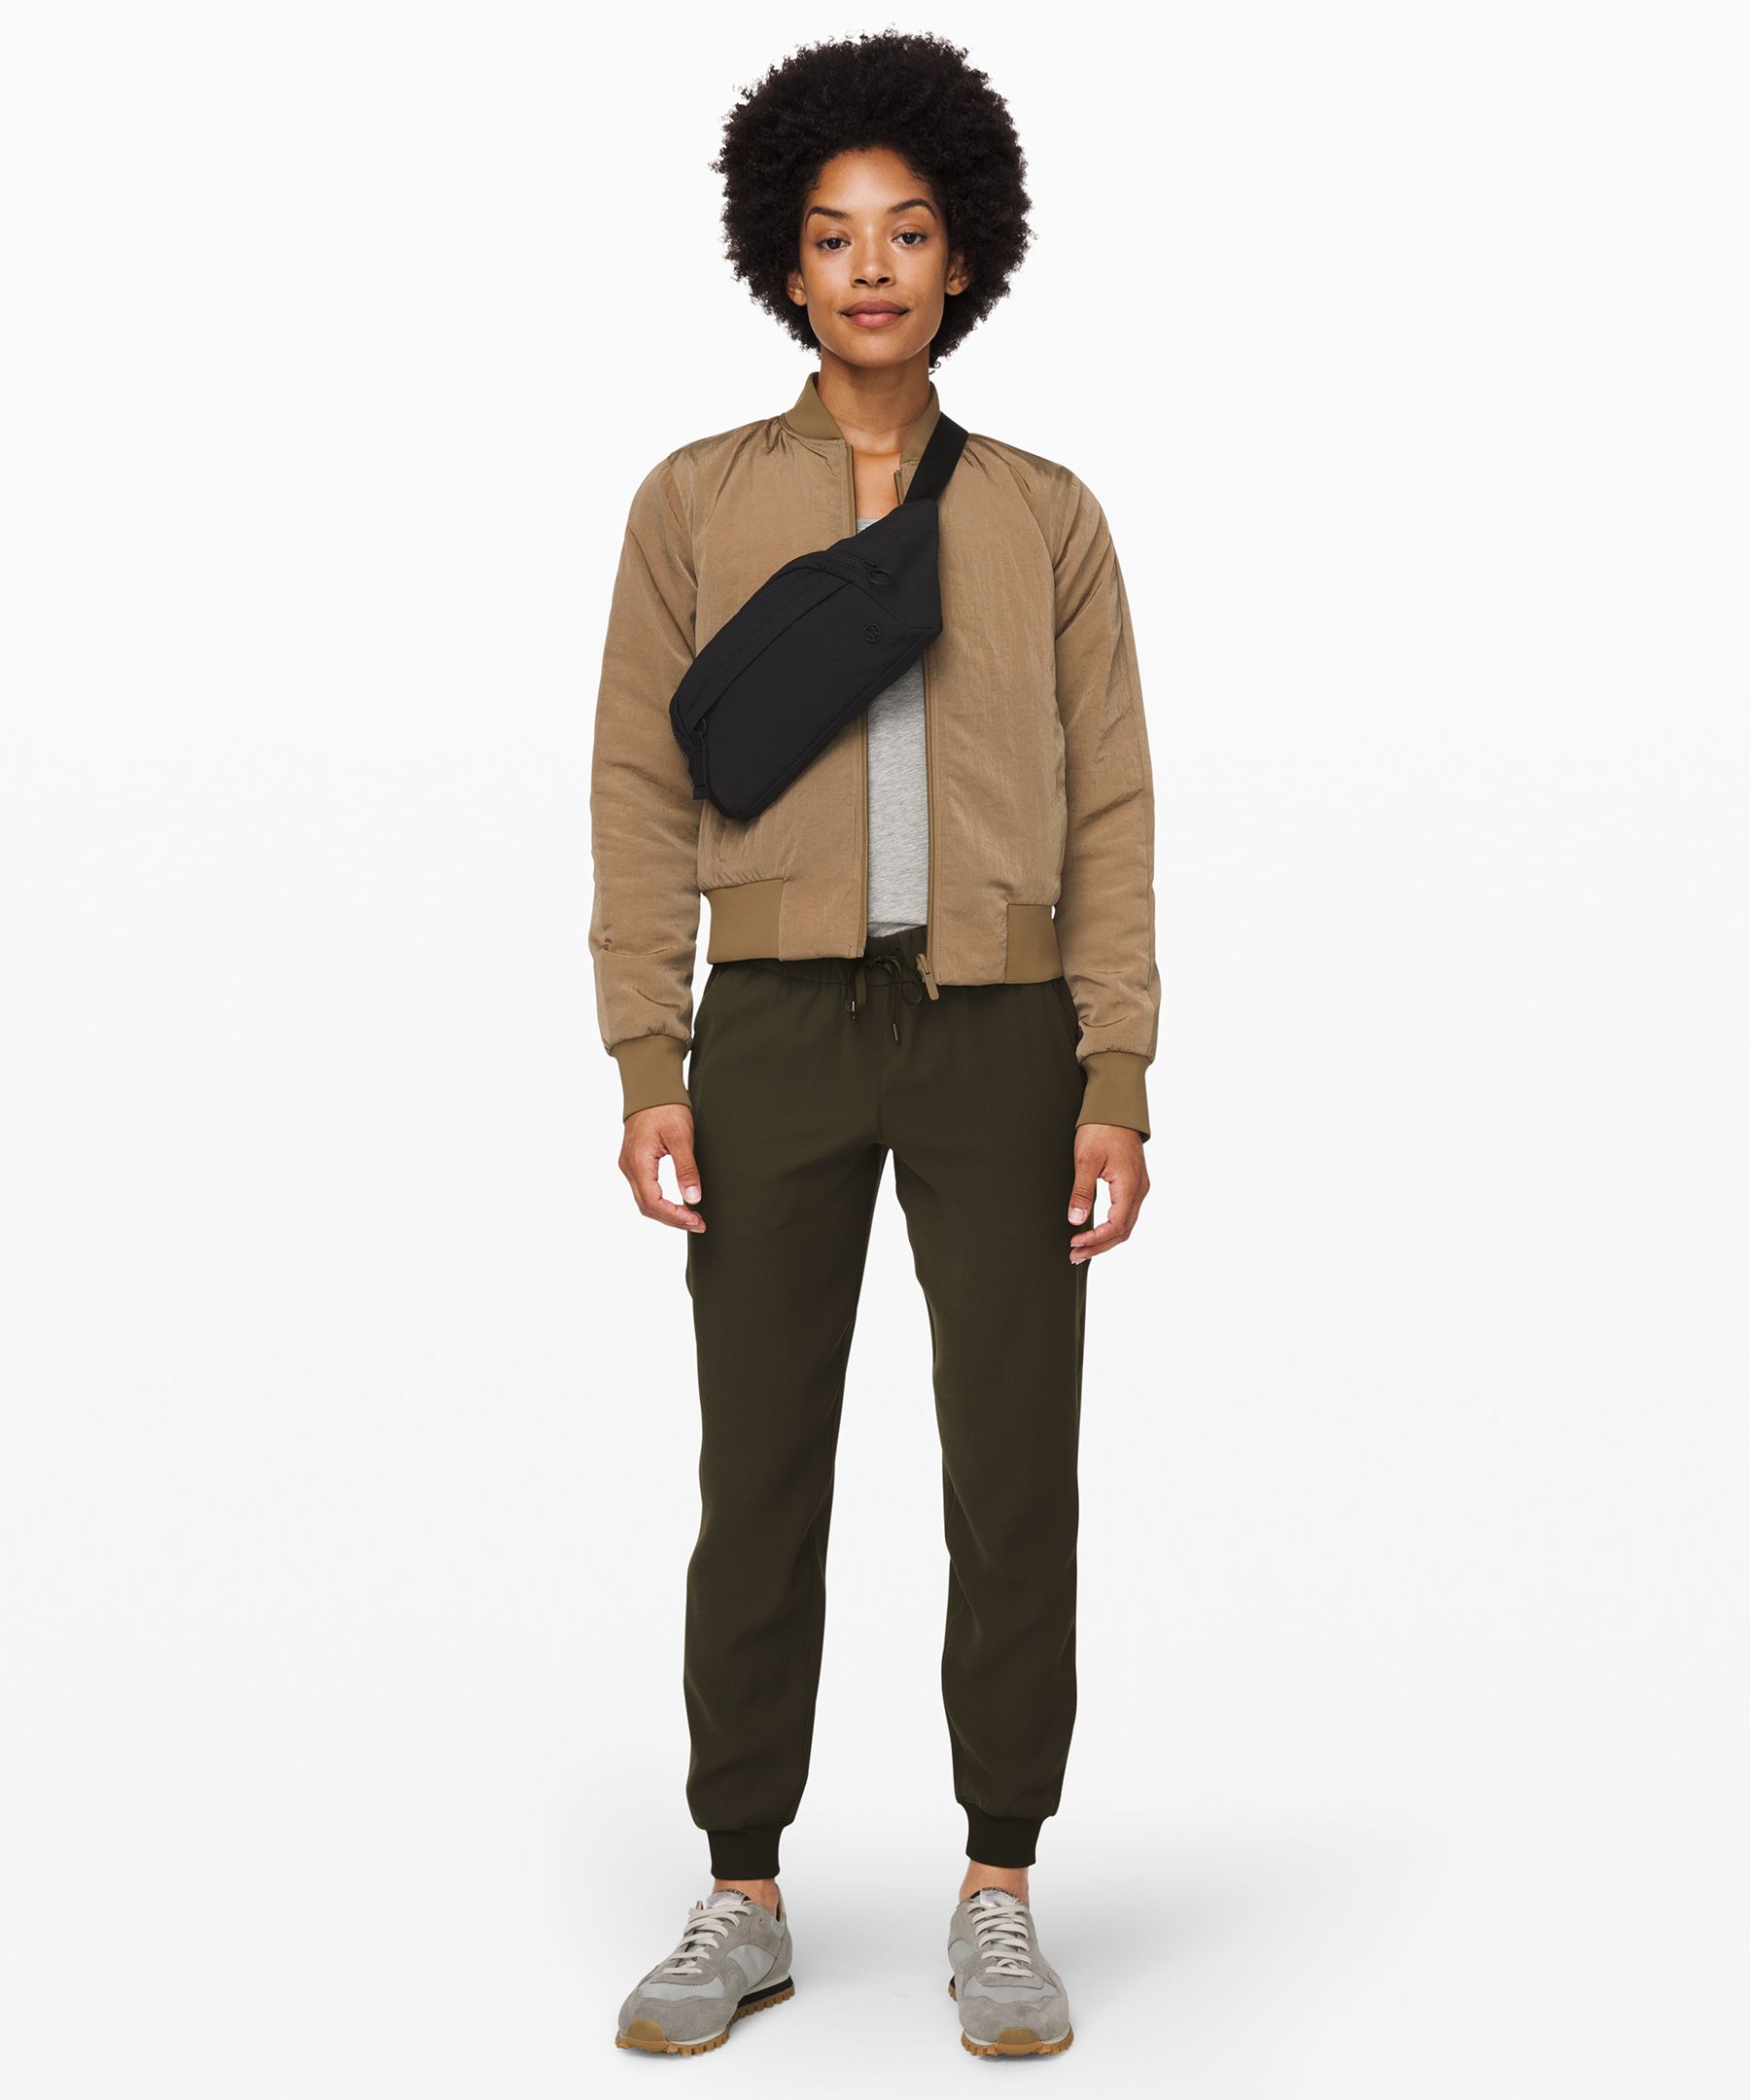 Lulu On The Fly Jogger Woven Pants For Women